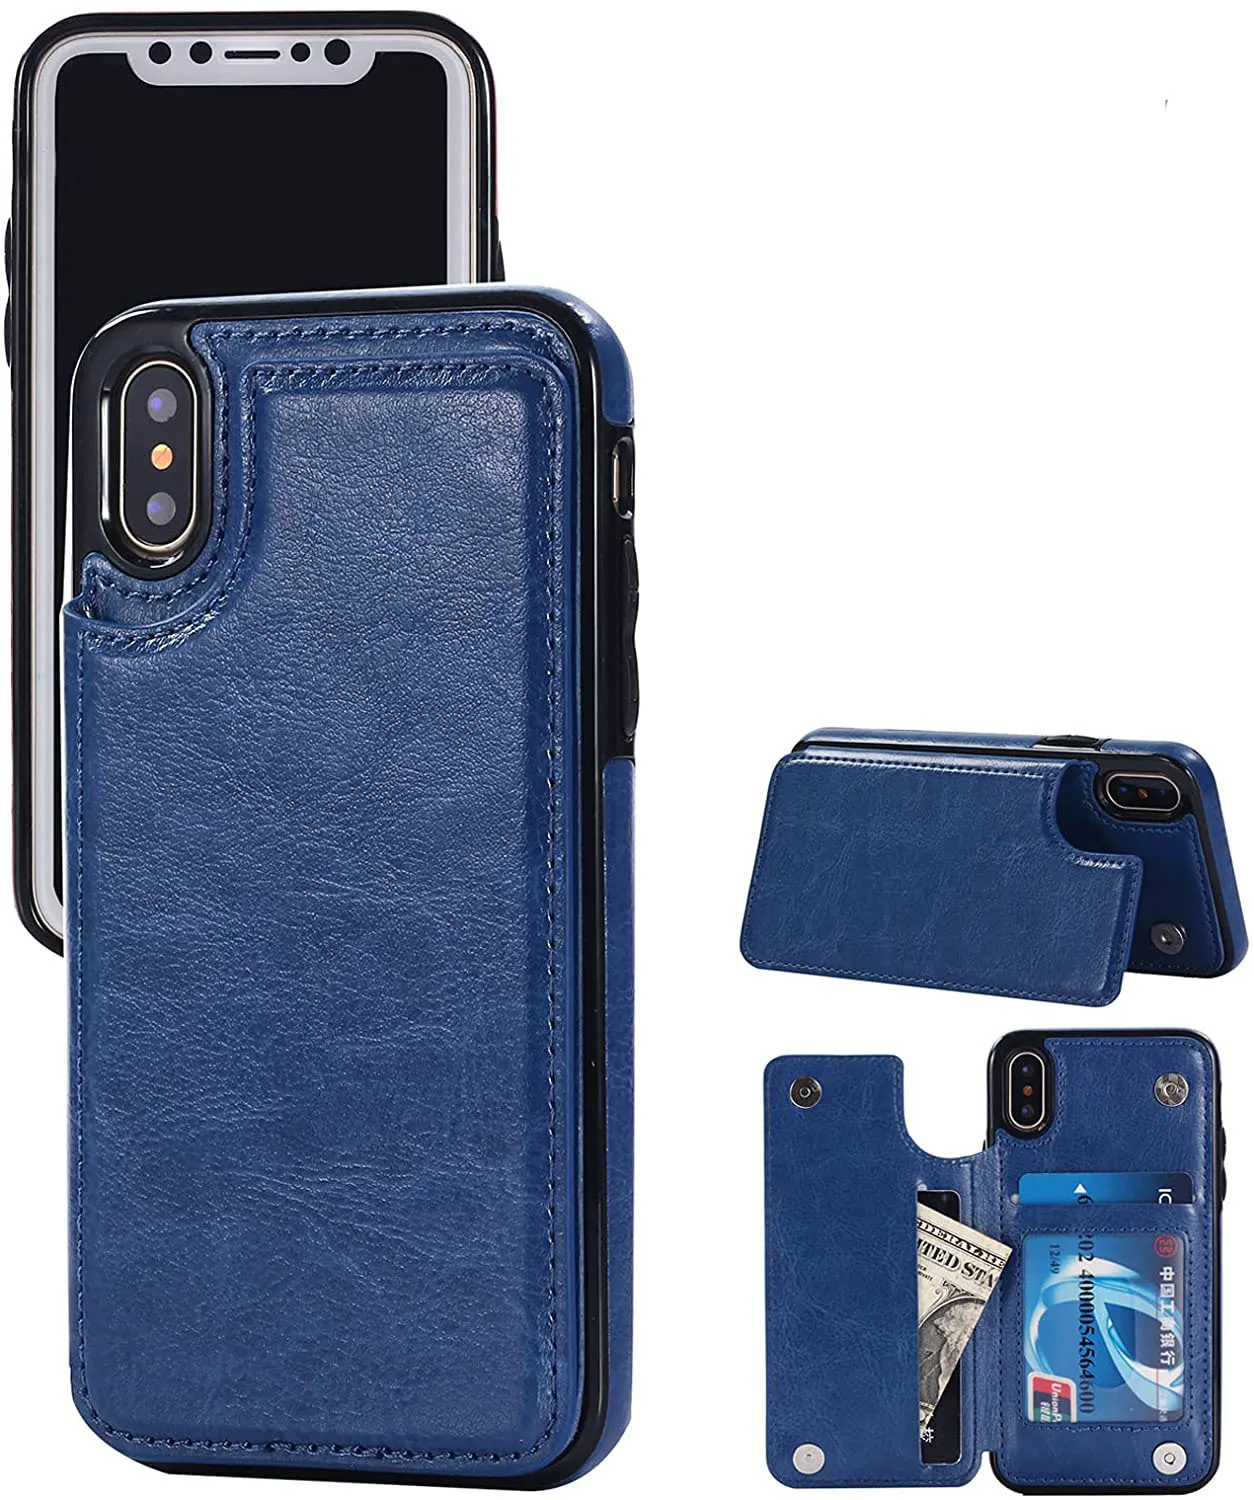 Phone Case for iPhone XR Wallet Case Cover Card Holder Cell  iPhoneXR iPhone10R i Phonex 10XR 10R 10 R RX CR iPhoneXRcases Women